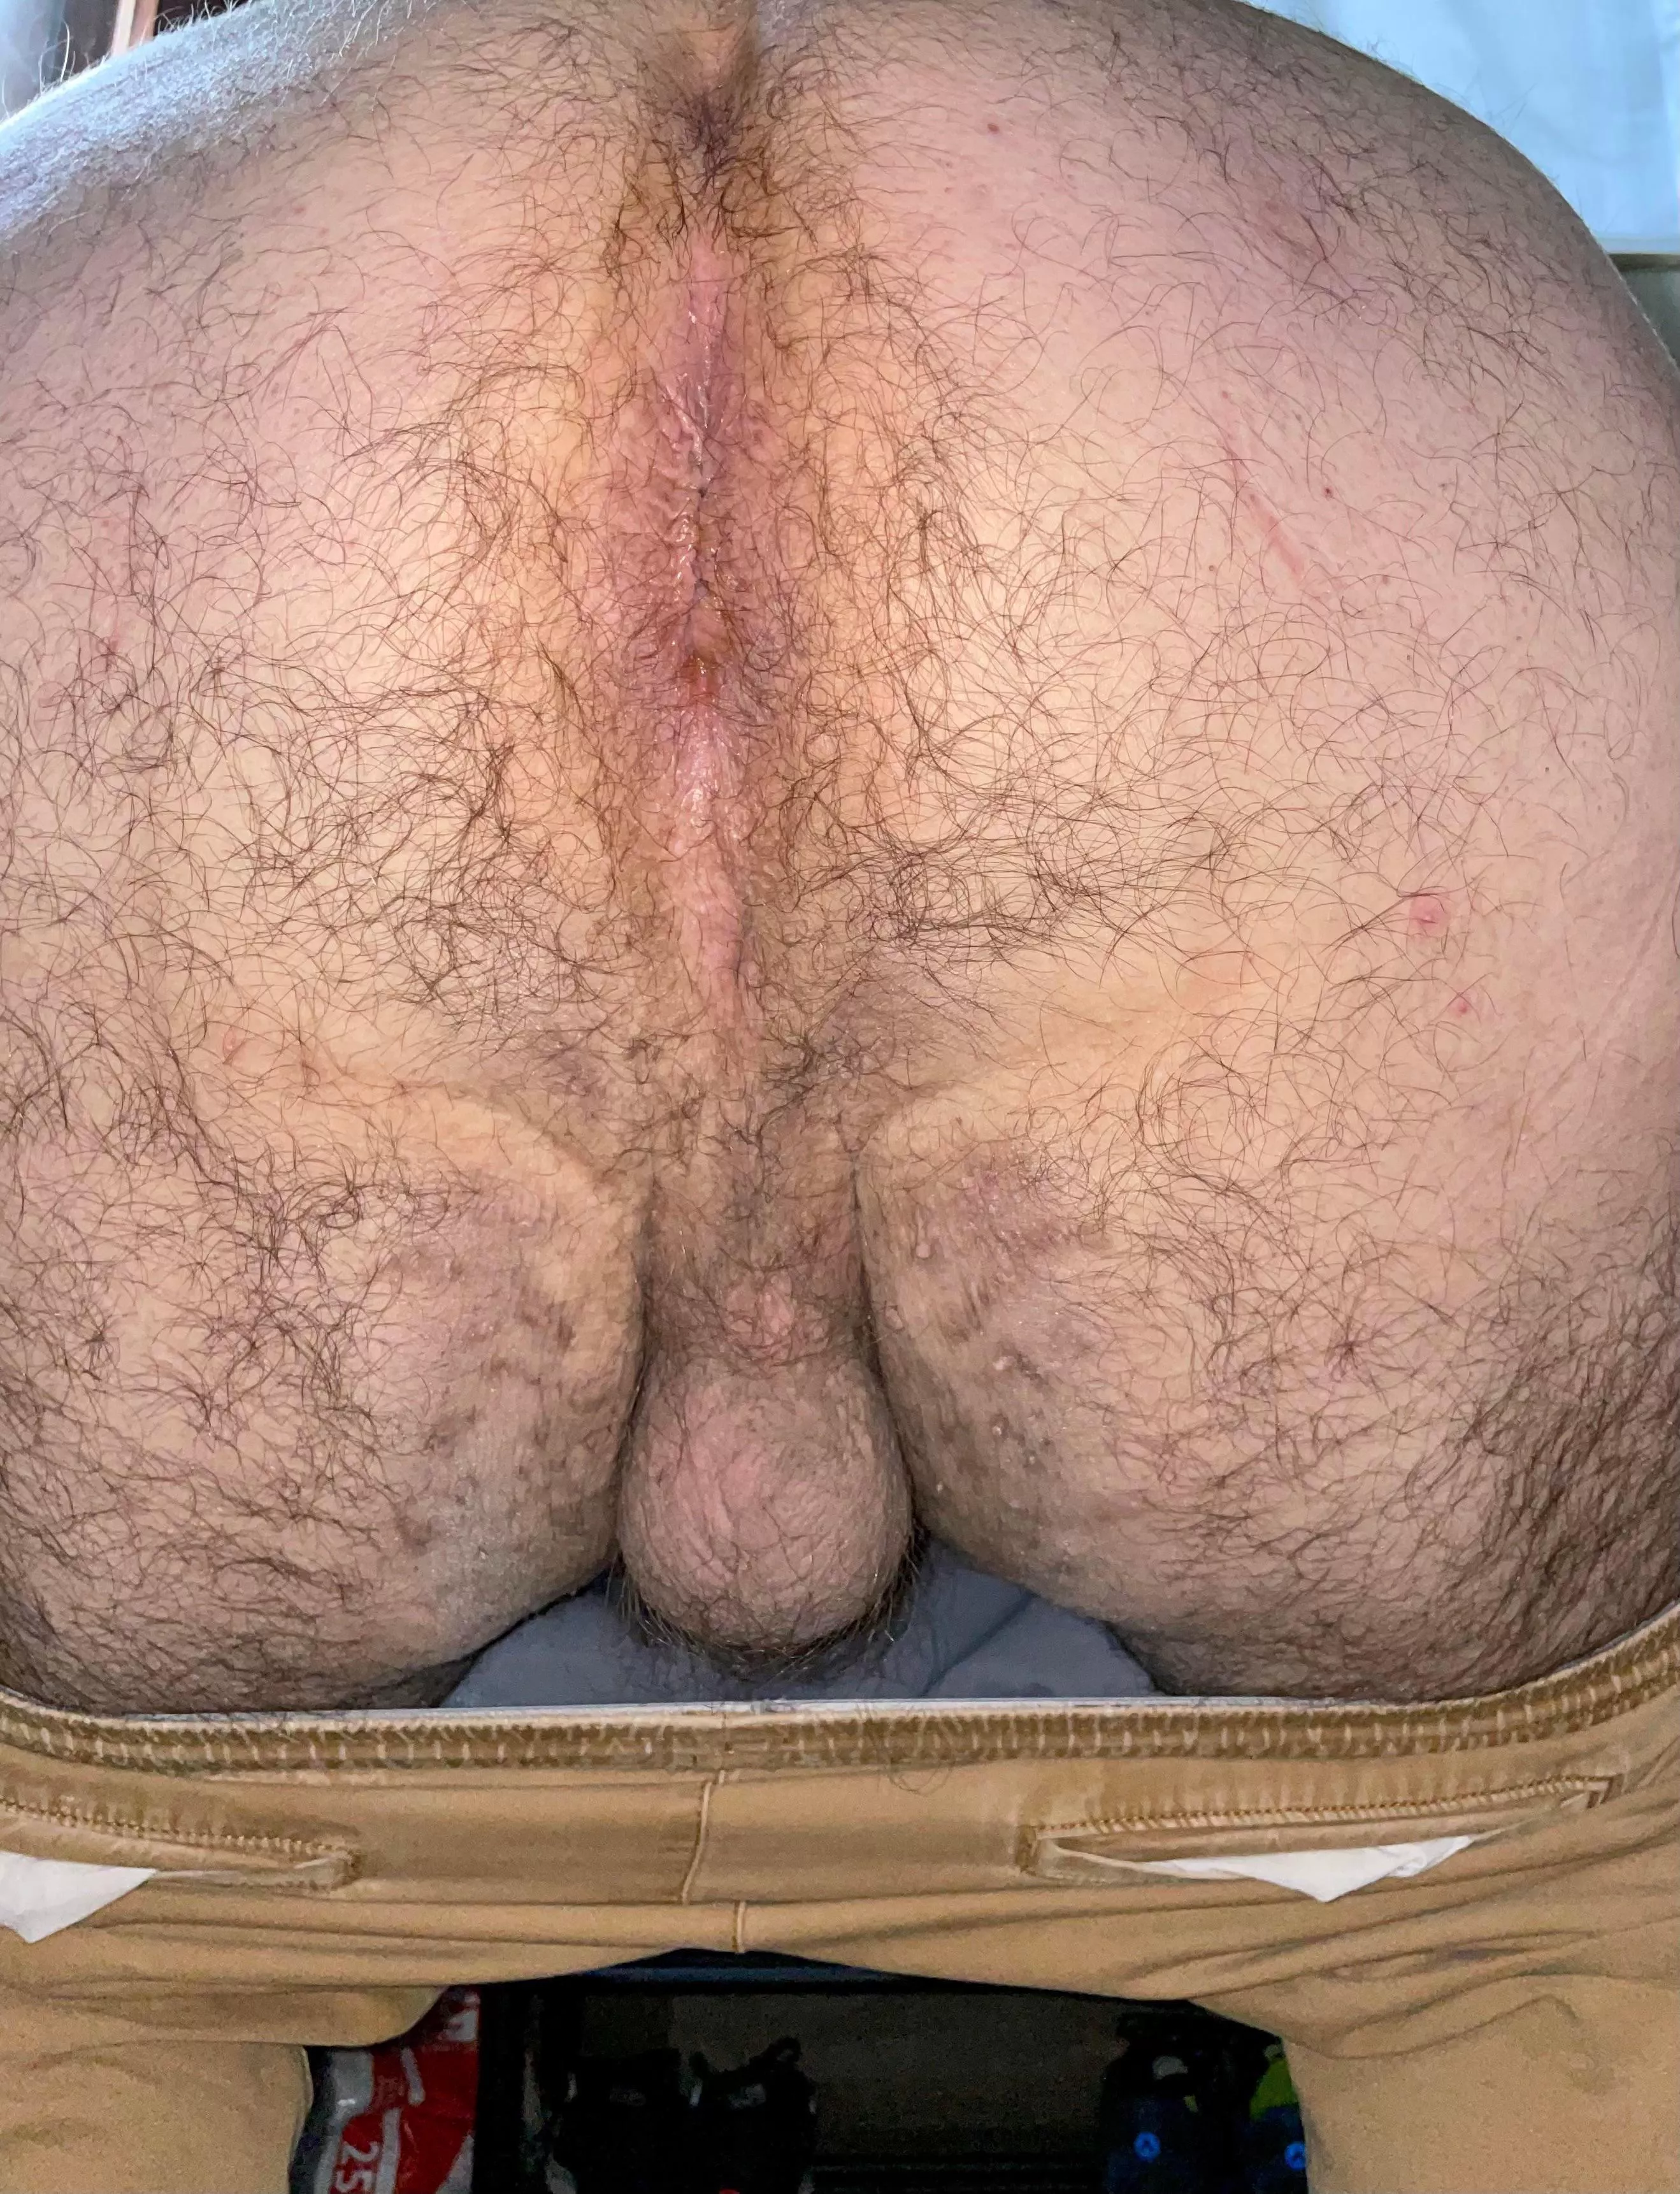 Fat Hairy Gaping - Chubby Hairy Asshole | Niche Top Mature